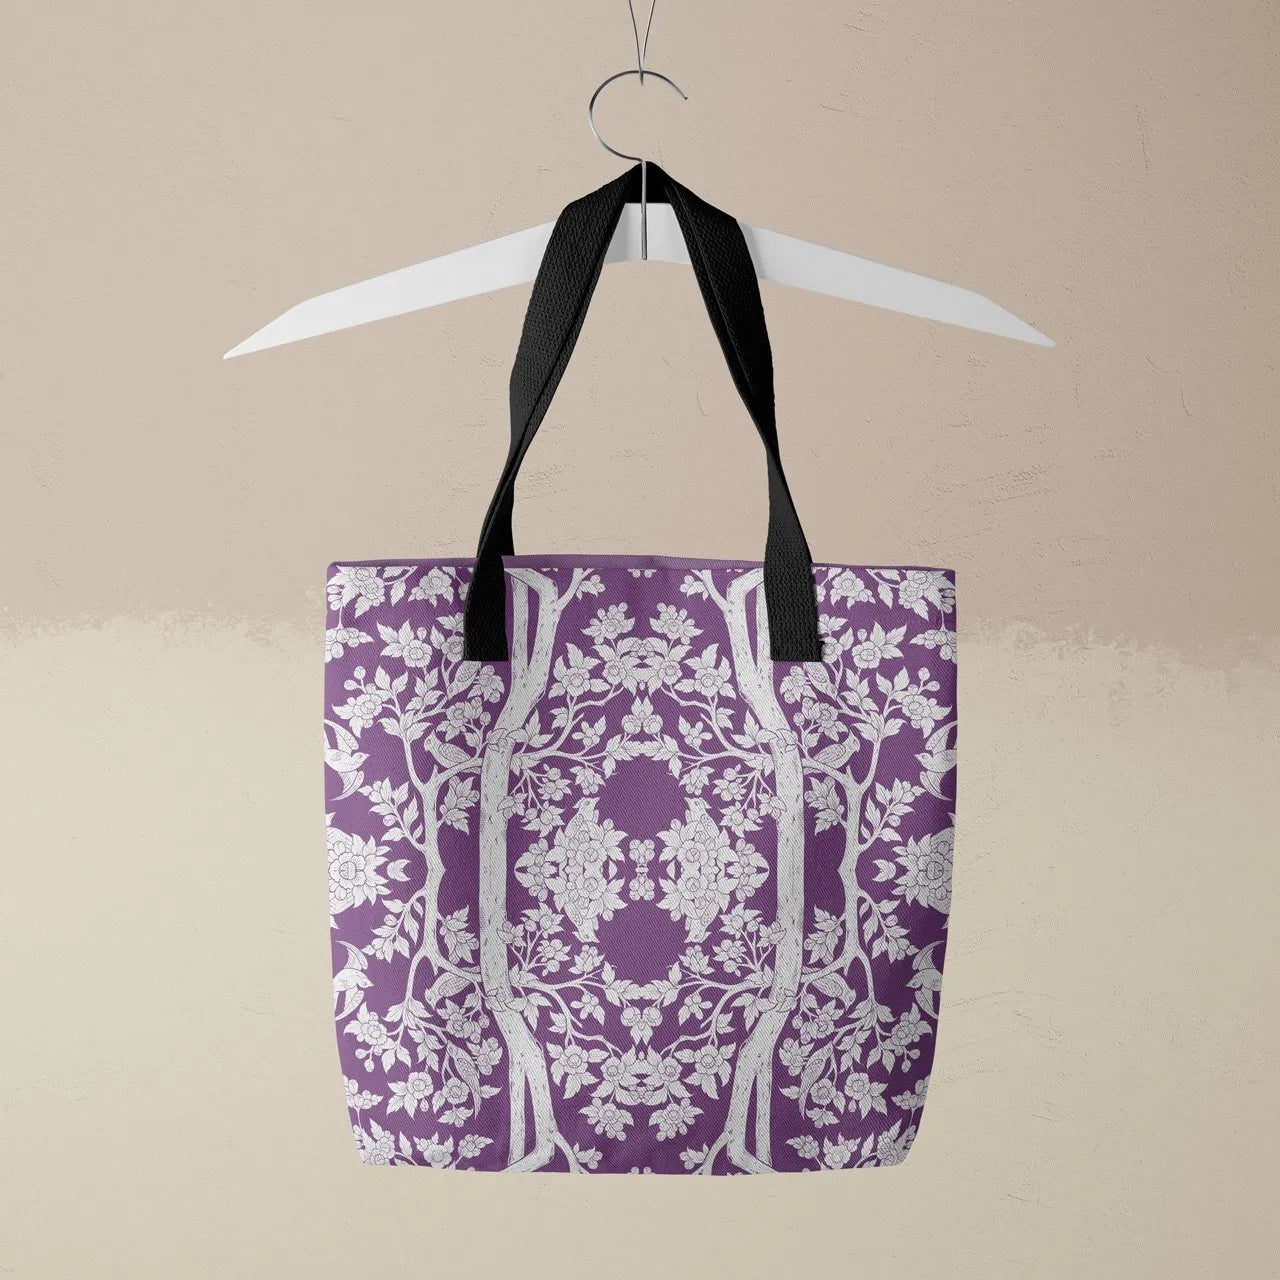 Aviary Tote - Purple Finch - Heavy Duty Reusable Grocery Bag - Black Handles - Shopping Totes - Aesthetic Art